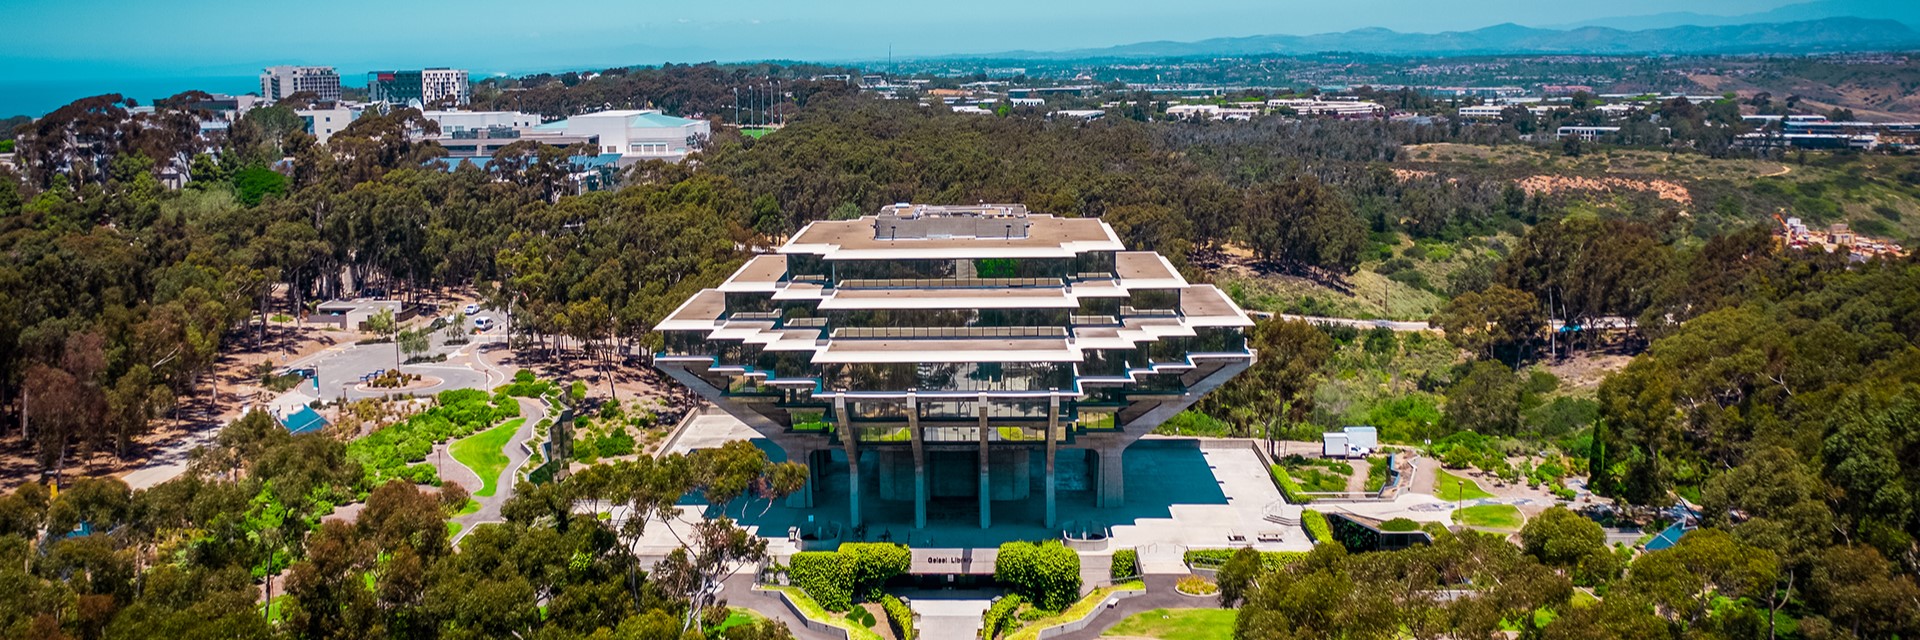 UCSD Aerial 